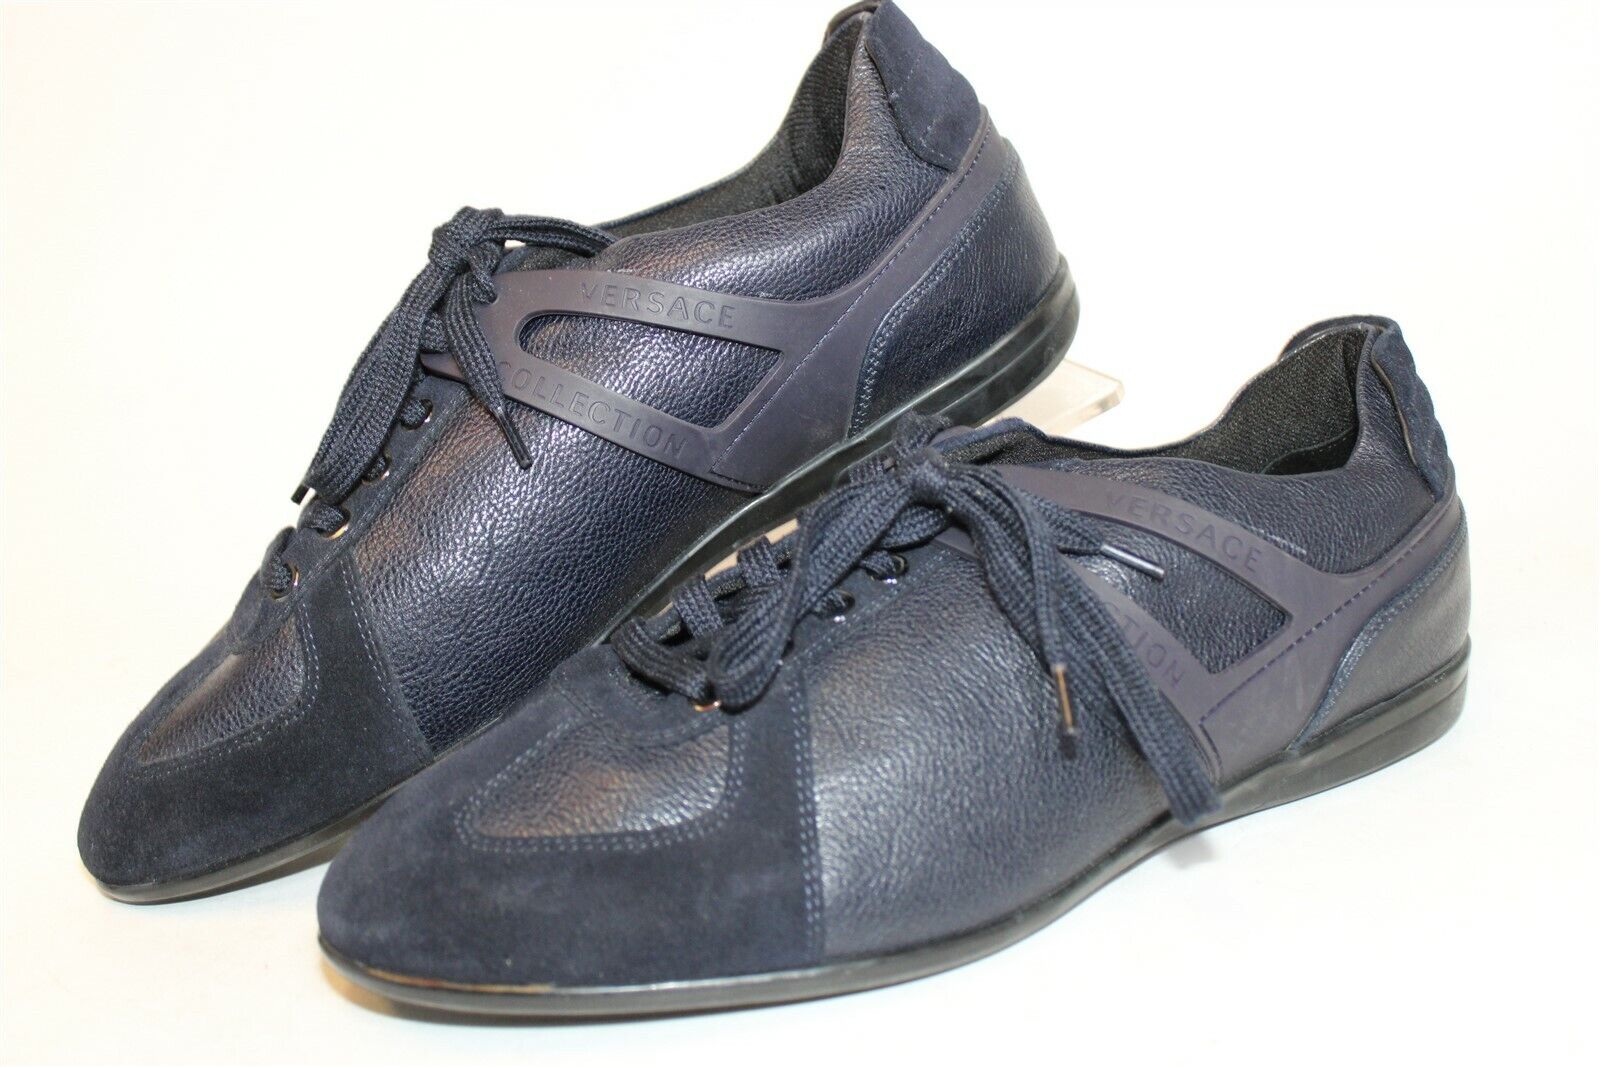 Versace Collection Mens 44 11 Dark Navy Leather Fashion Sneakers Lace Up Shoes